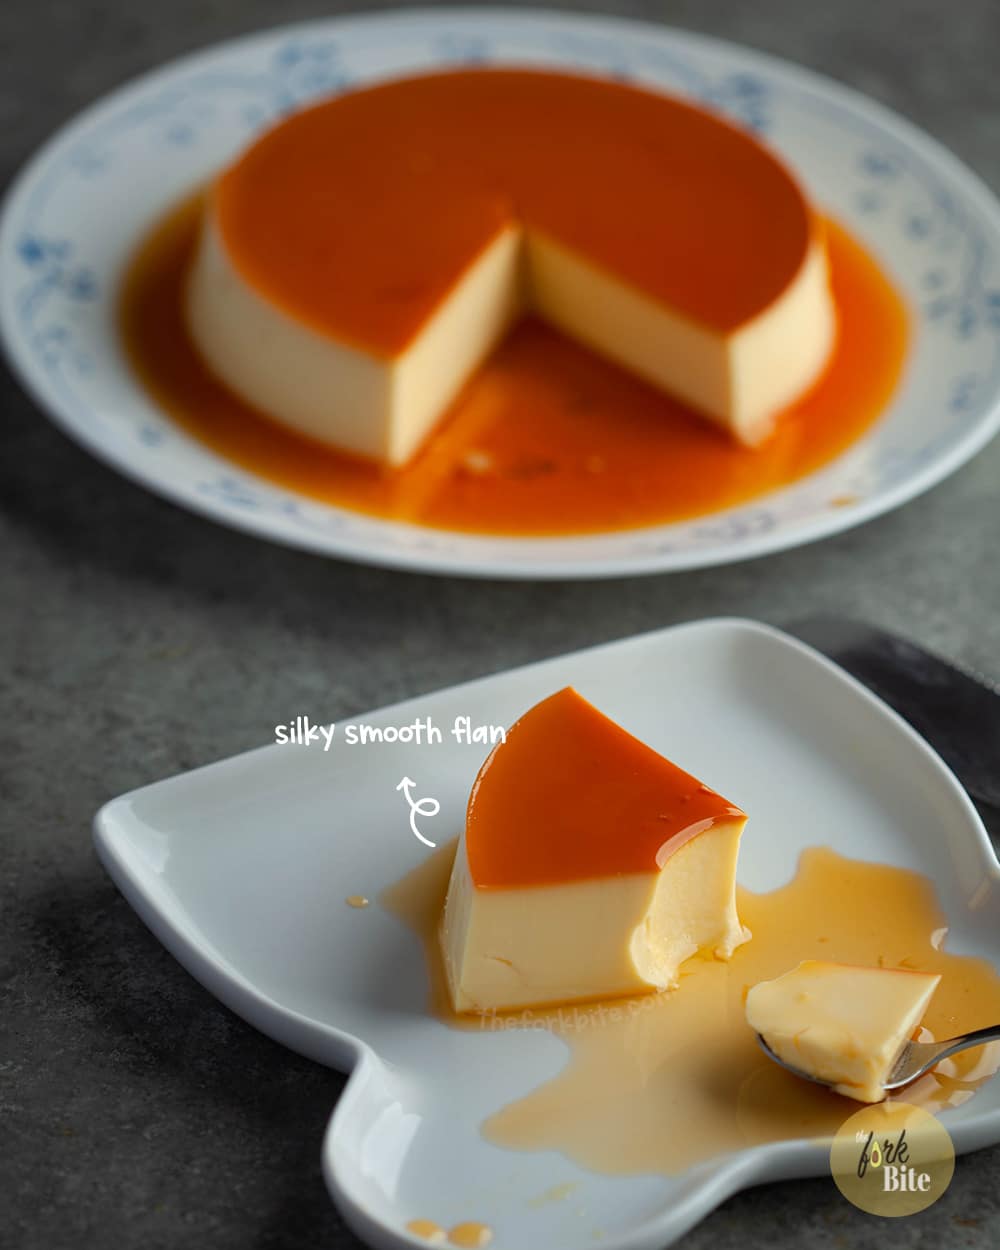 In general, most experts agree that flan will last for around three to four days in the fridge before it starts to spoil. It will significantly affect how long the flan will last if you wrap it well.